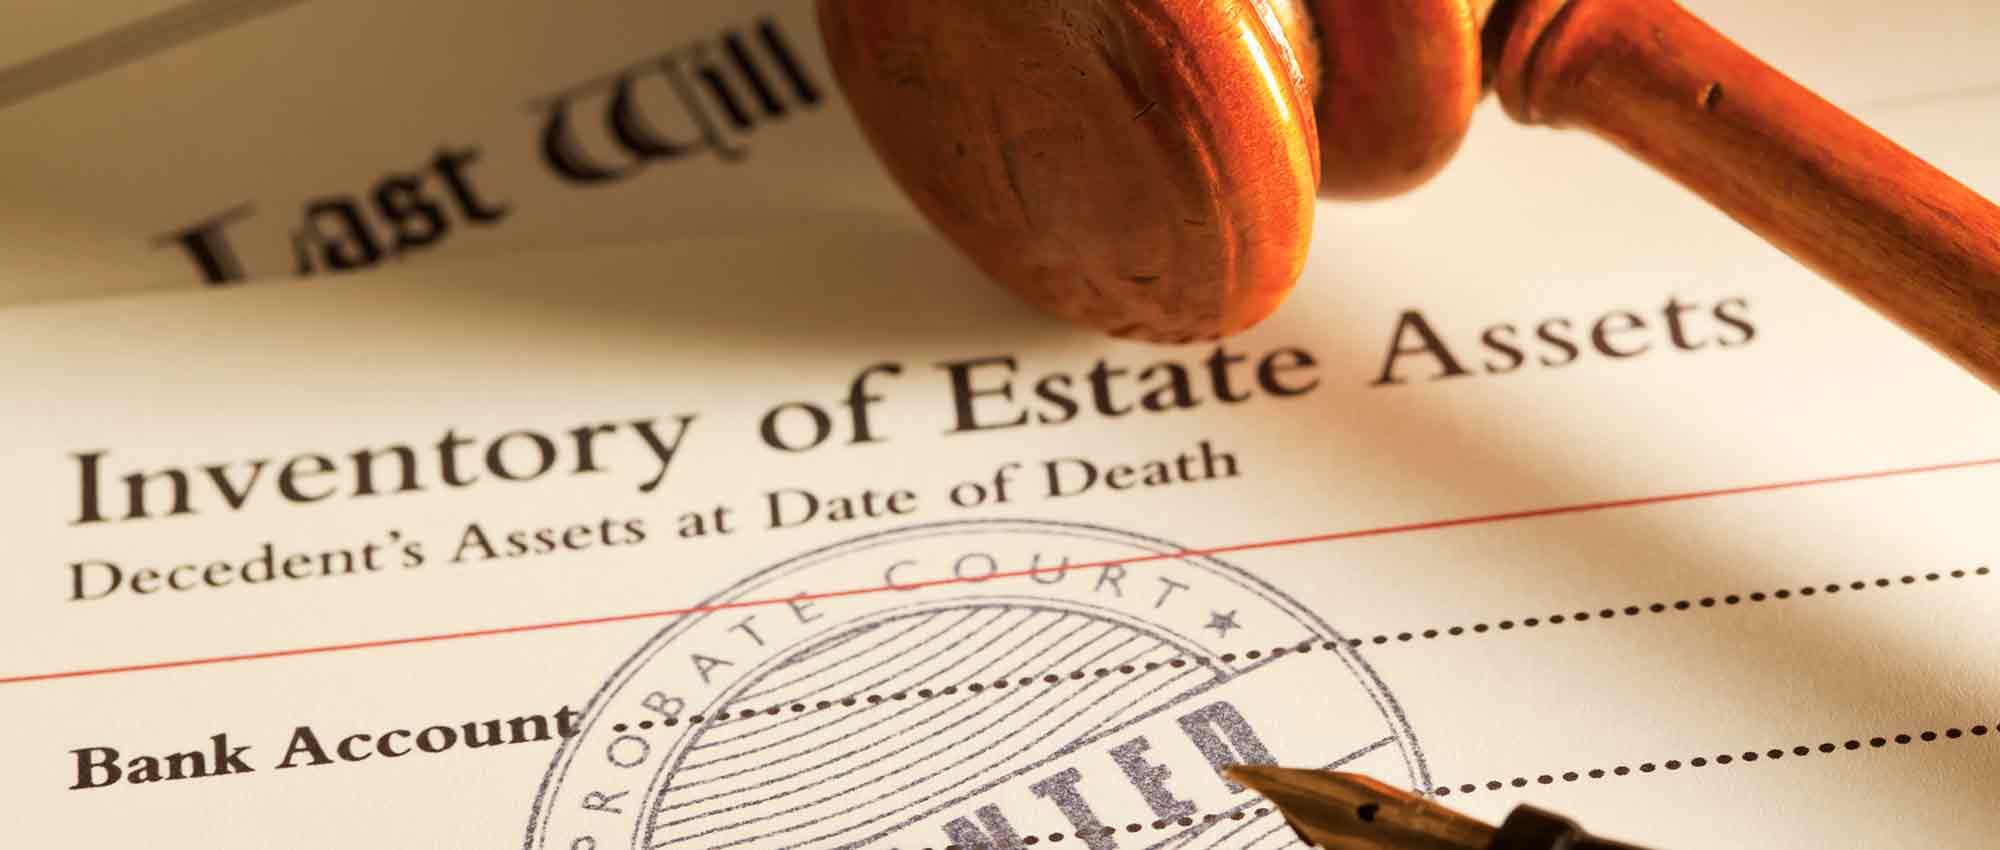 Inventory of Estate Assets form for probate is approved.